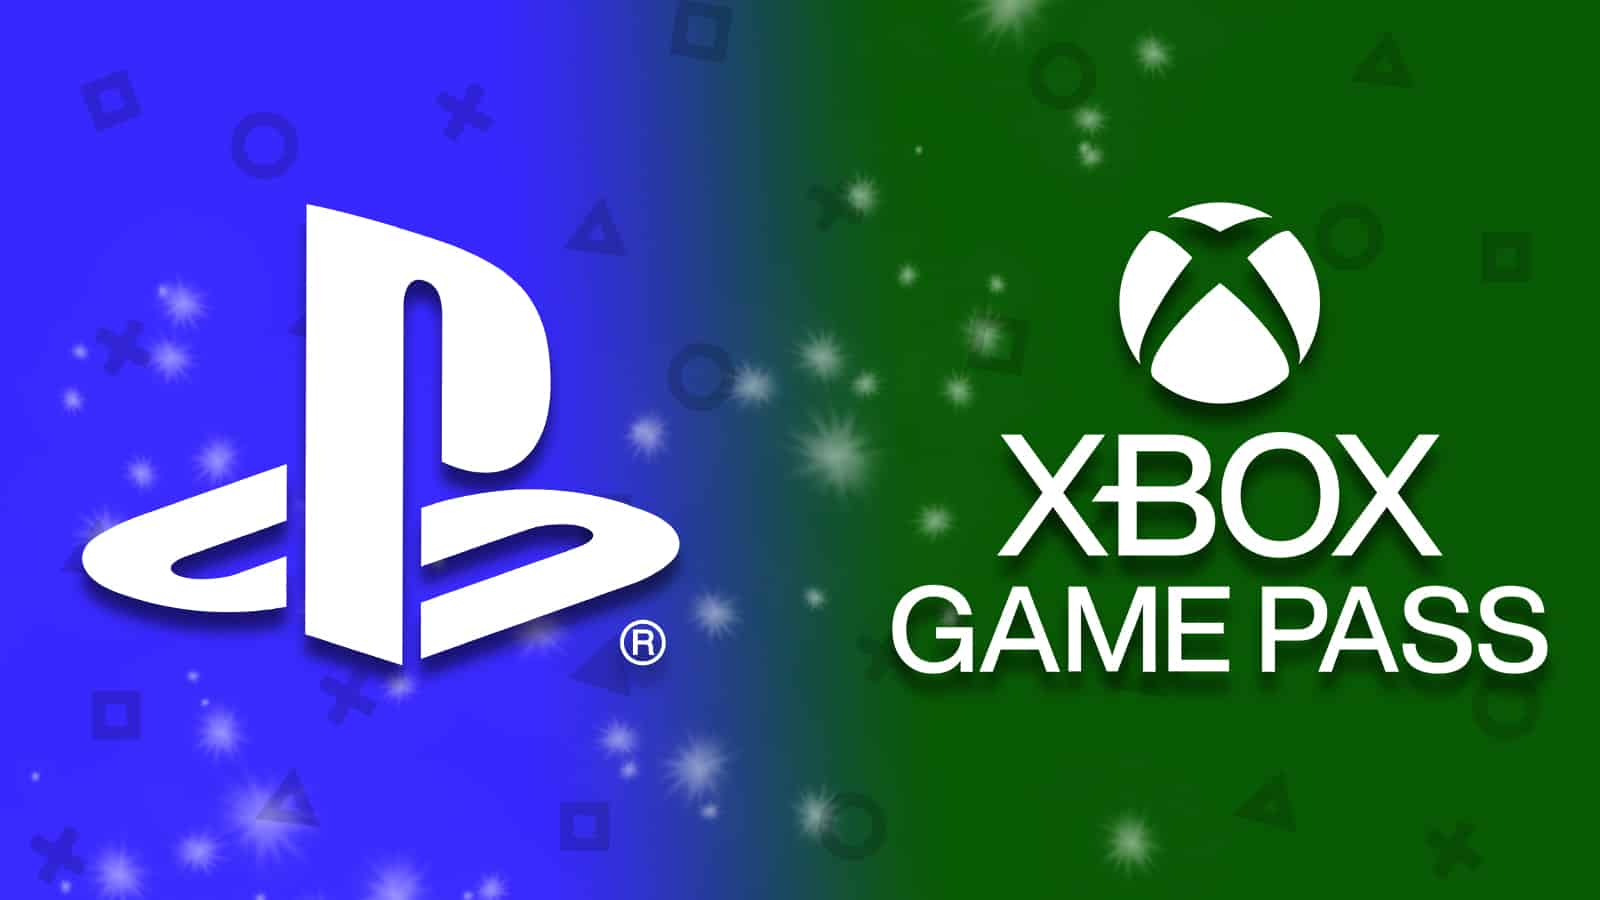 Xbox Game Pass new release has a gorgeous link to PlayStation